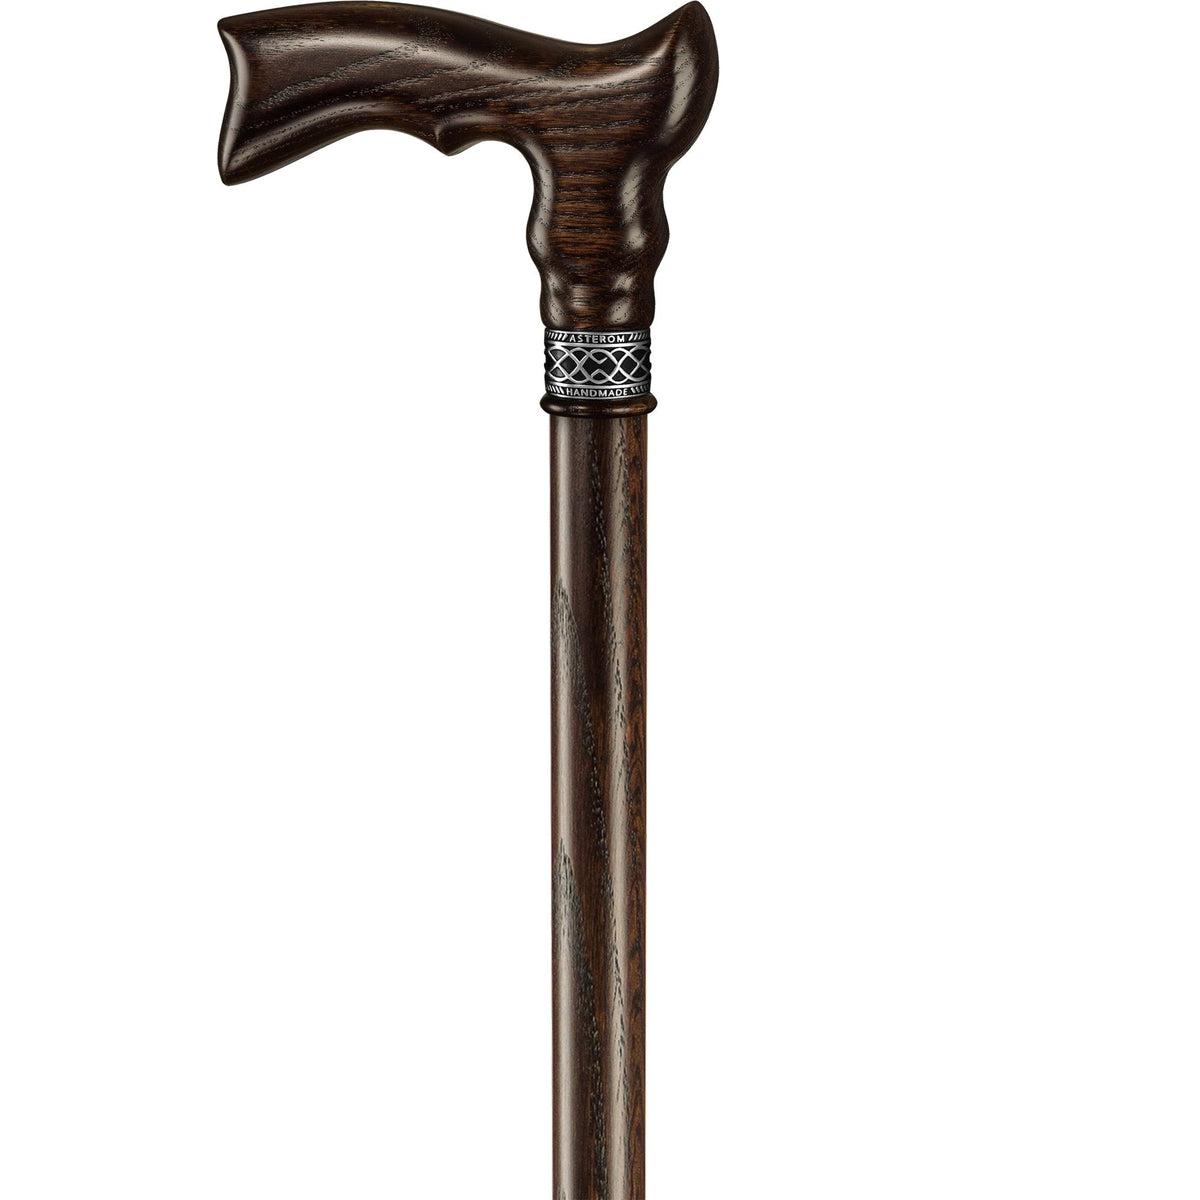 Fashionable Wooden Vintage Walking Cane For Men and Women